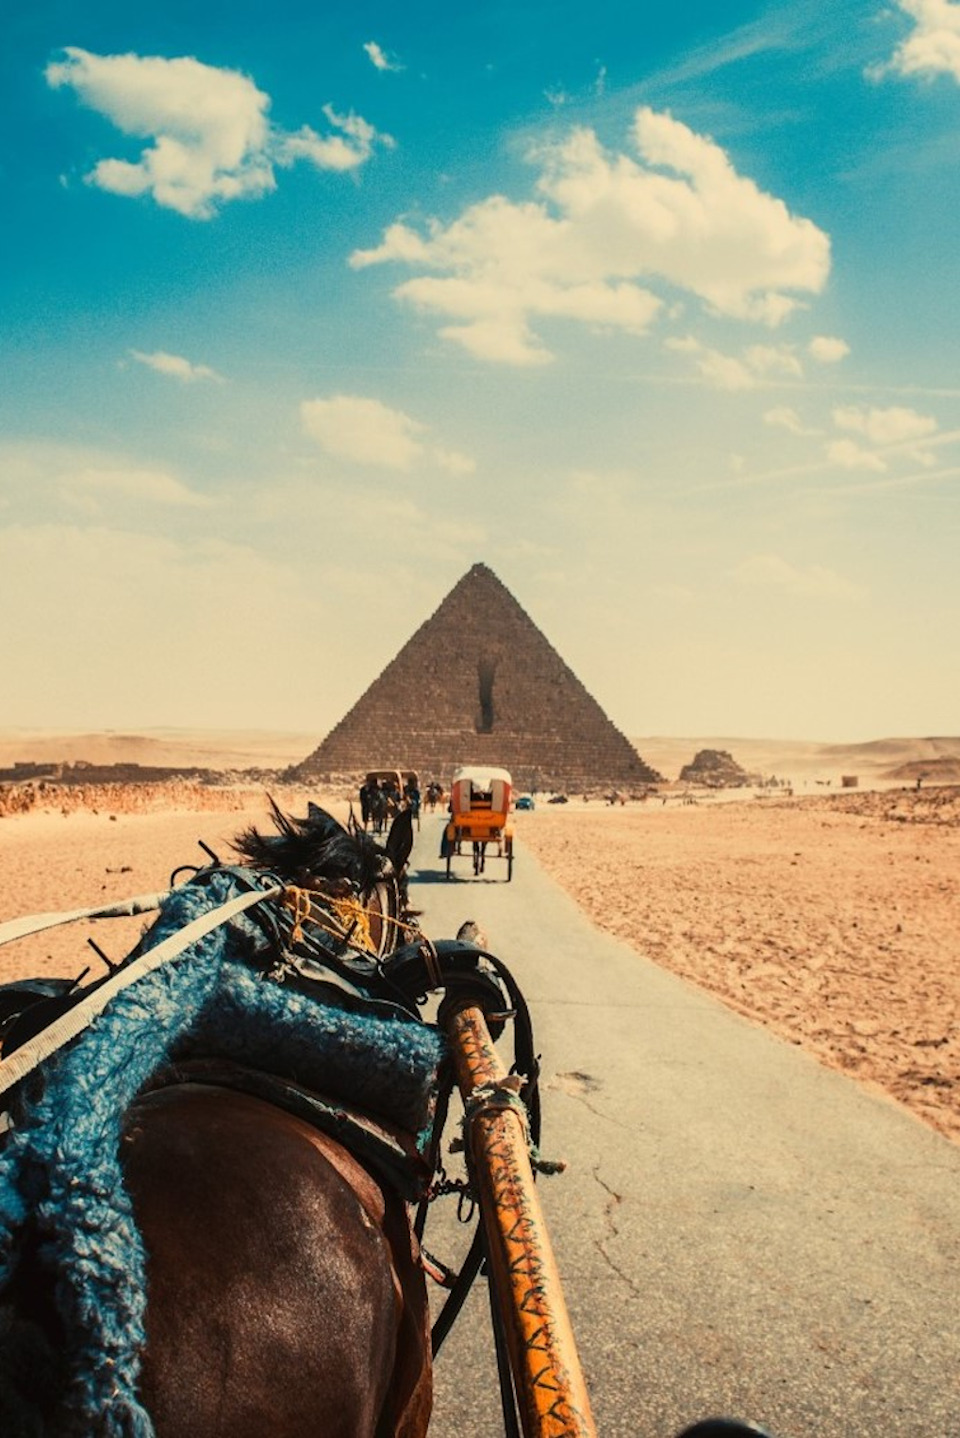 A horse in front of the pyramids